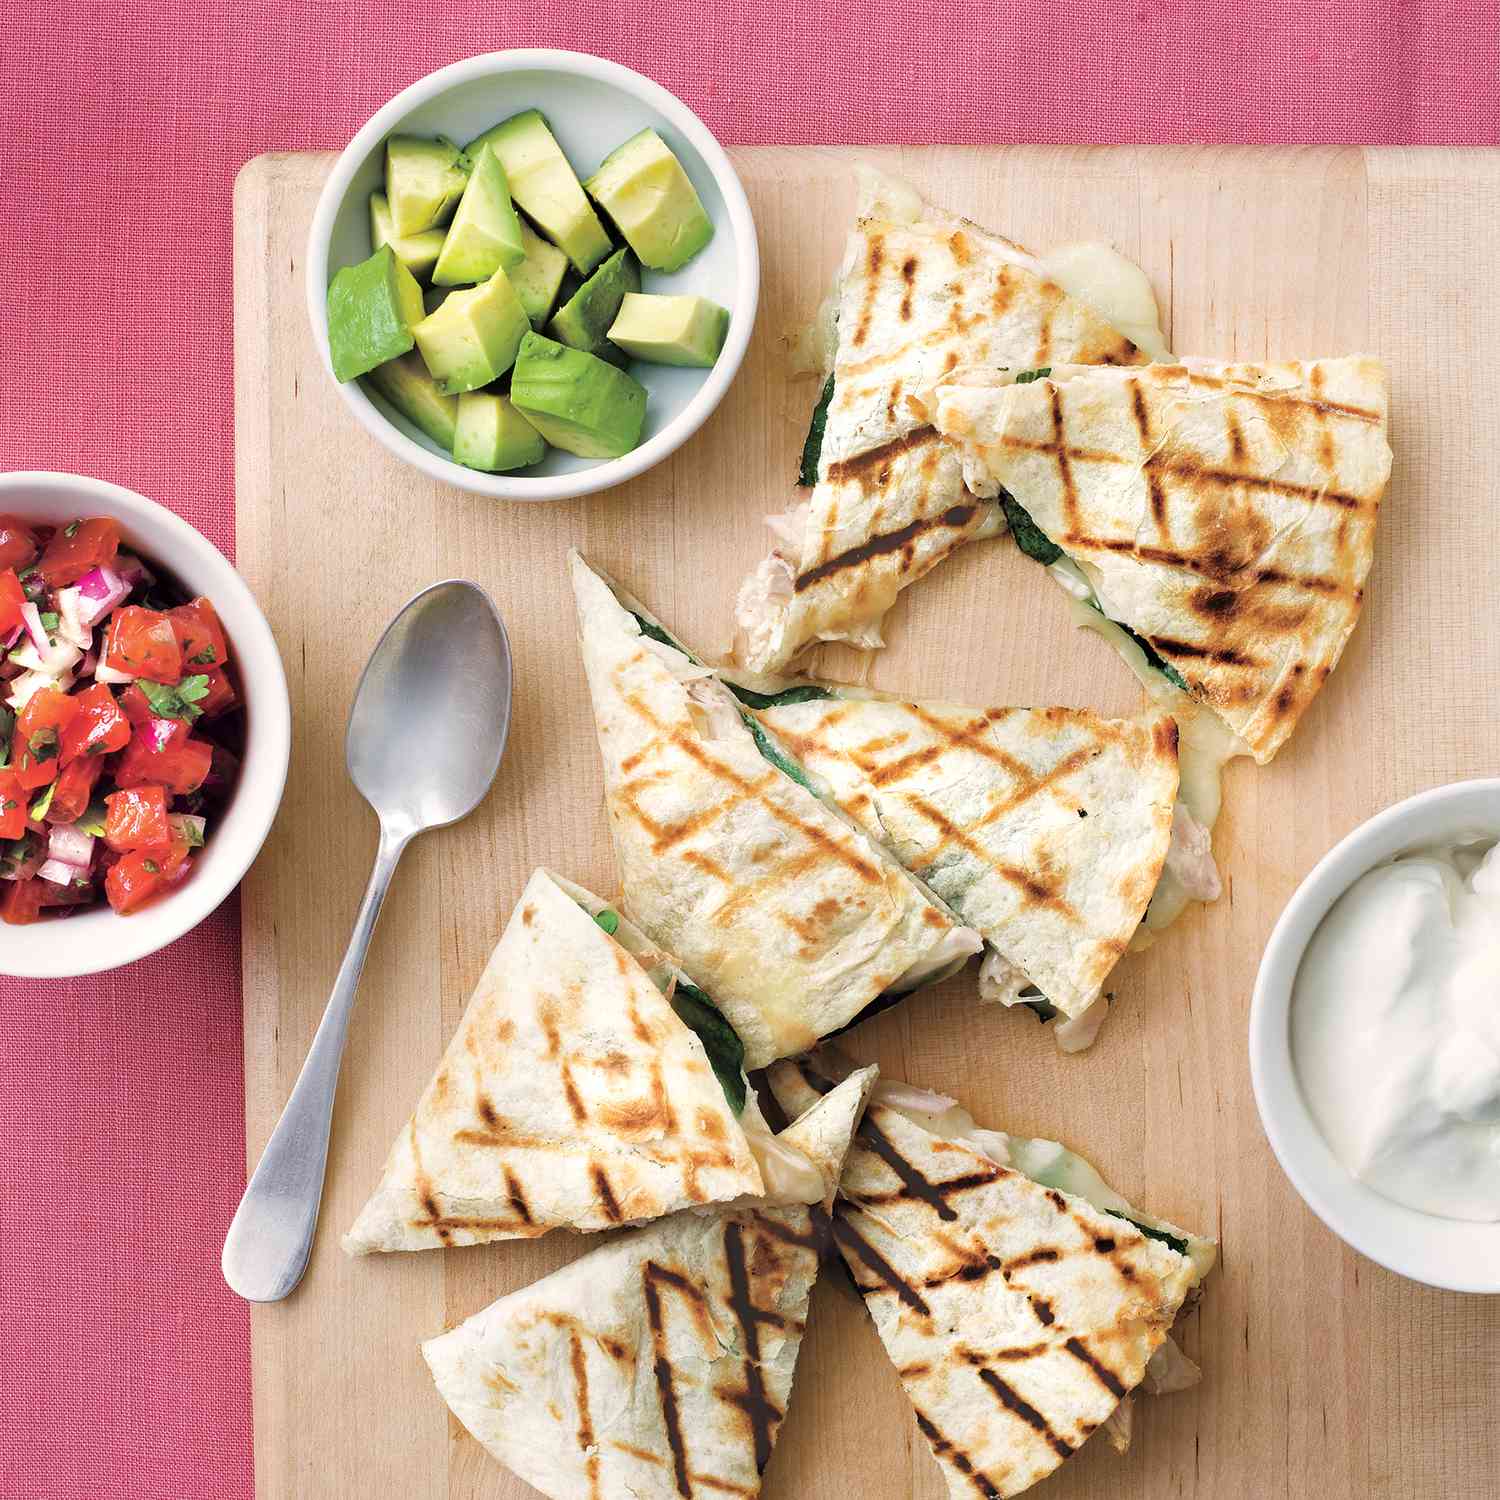 Grilled Chicken and Spinach Quesadillas